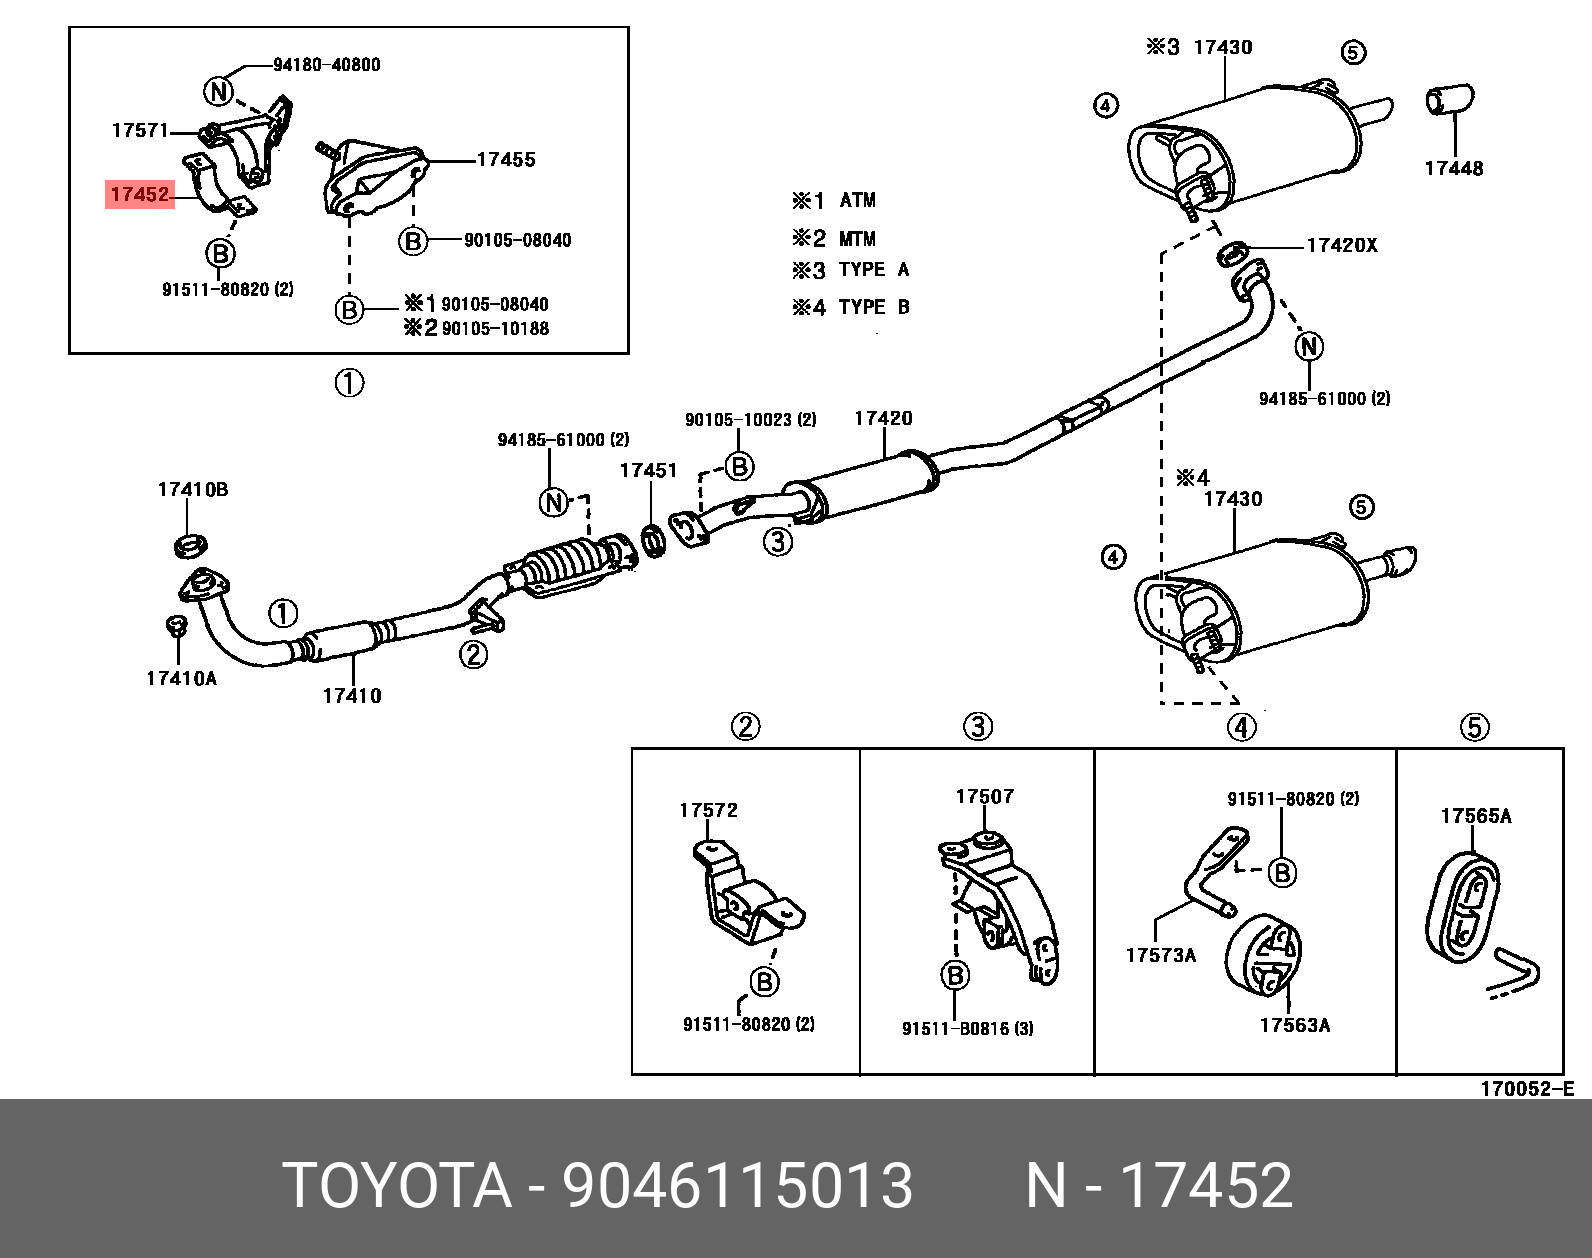 SPRINTER 199505 - 200008, CLAMP, EXHAUST PIPE